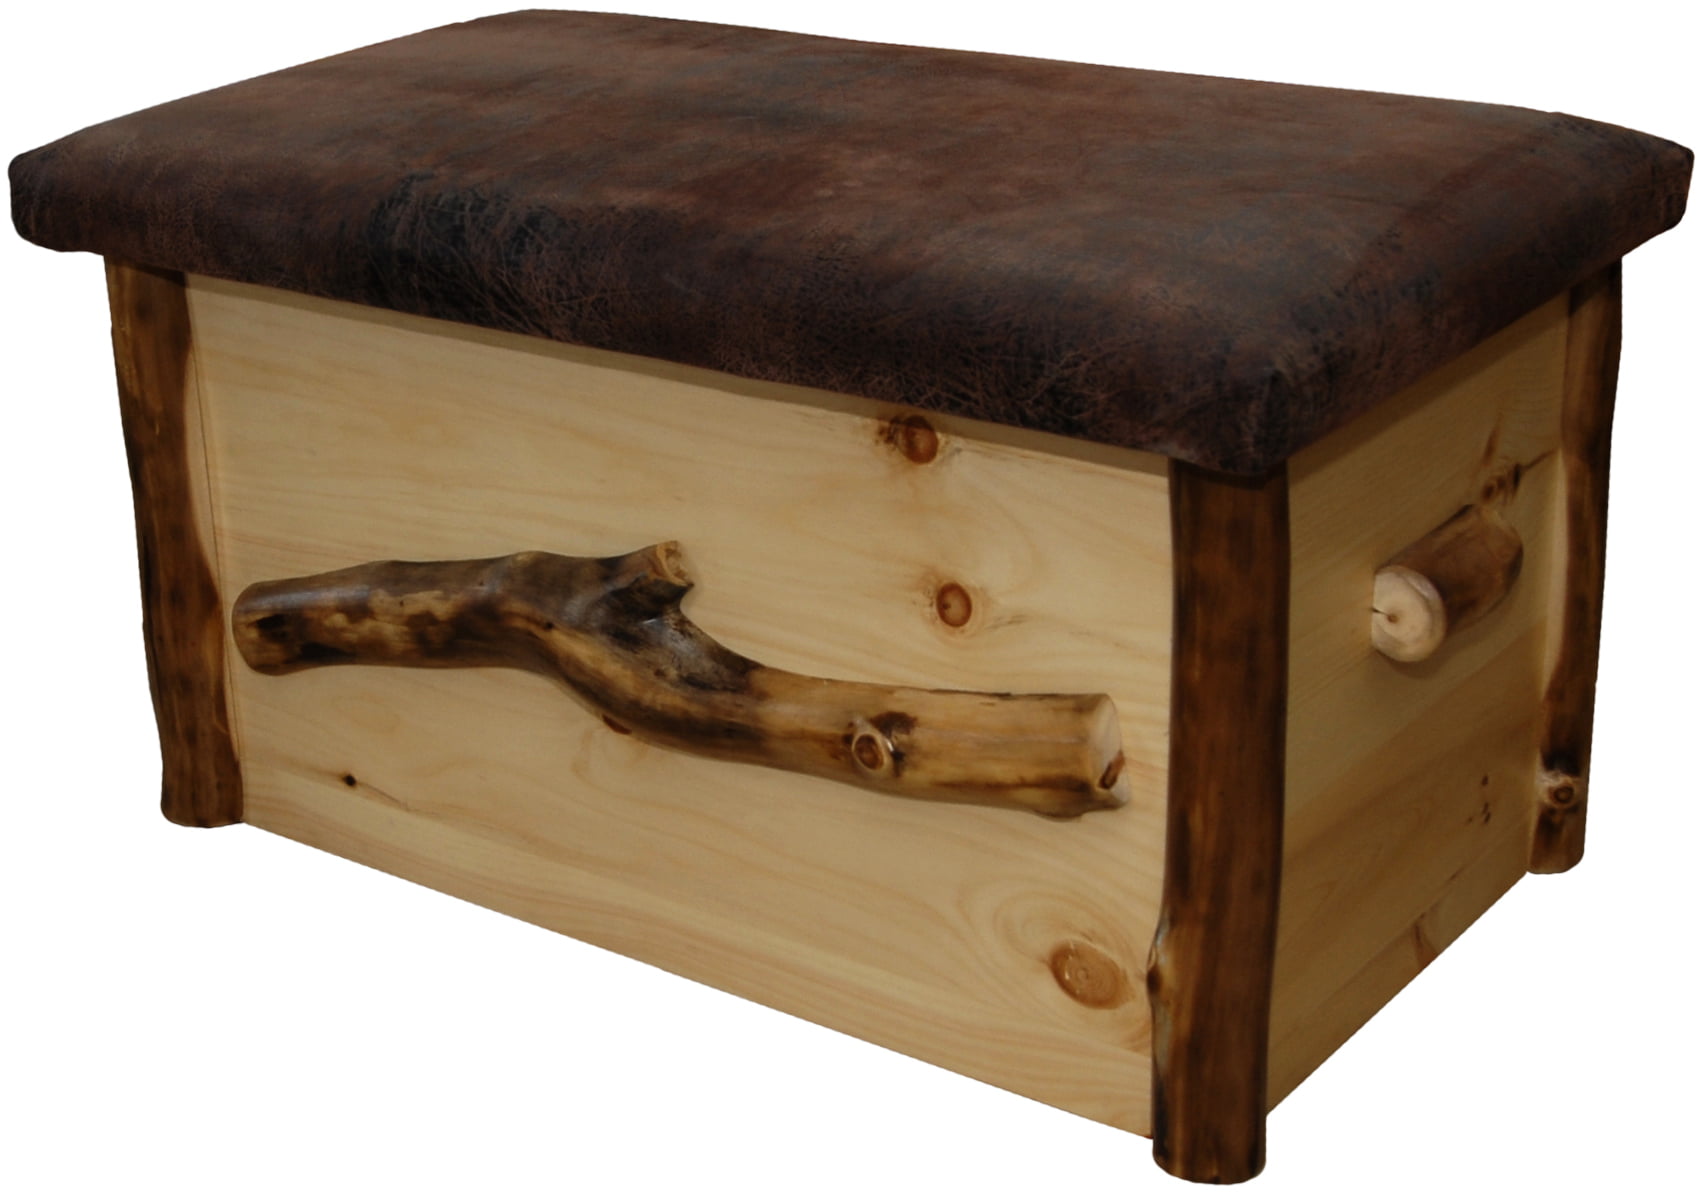 Rustic Aspen Log Blanket Chest with Cushioned Seat